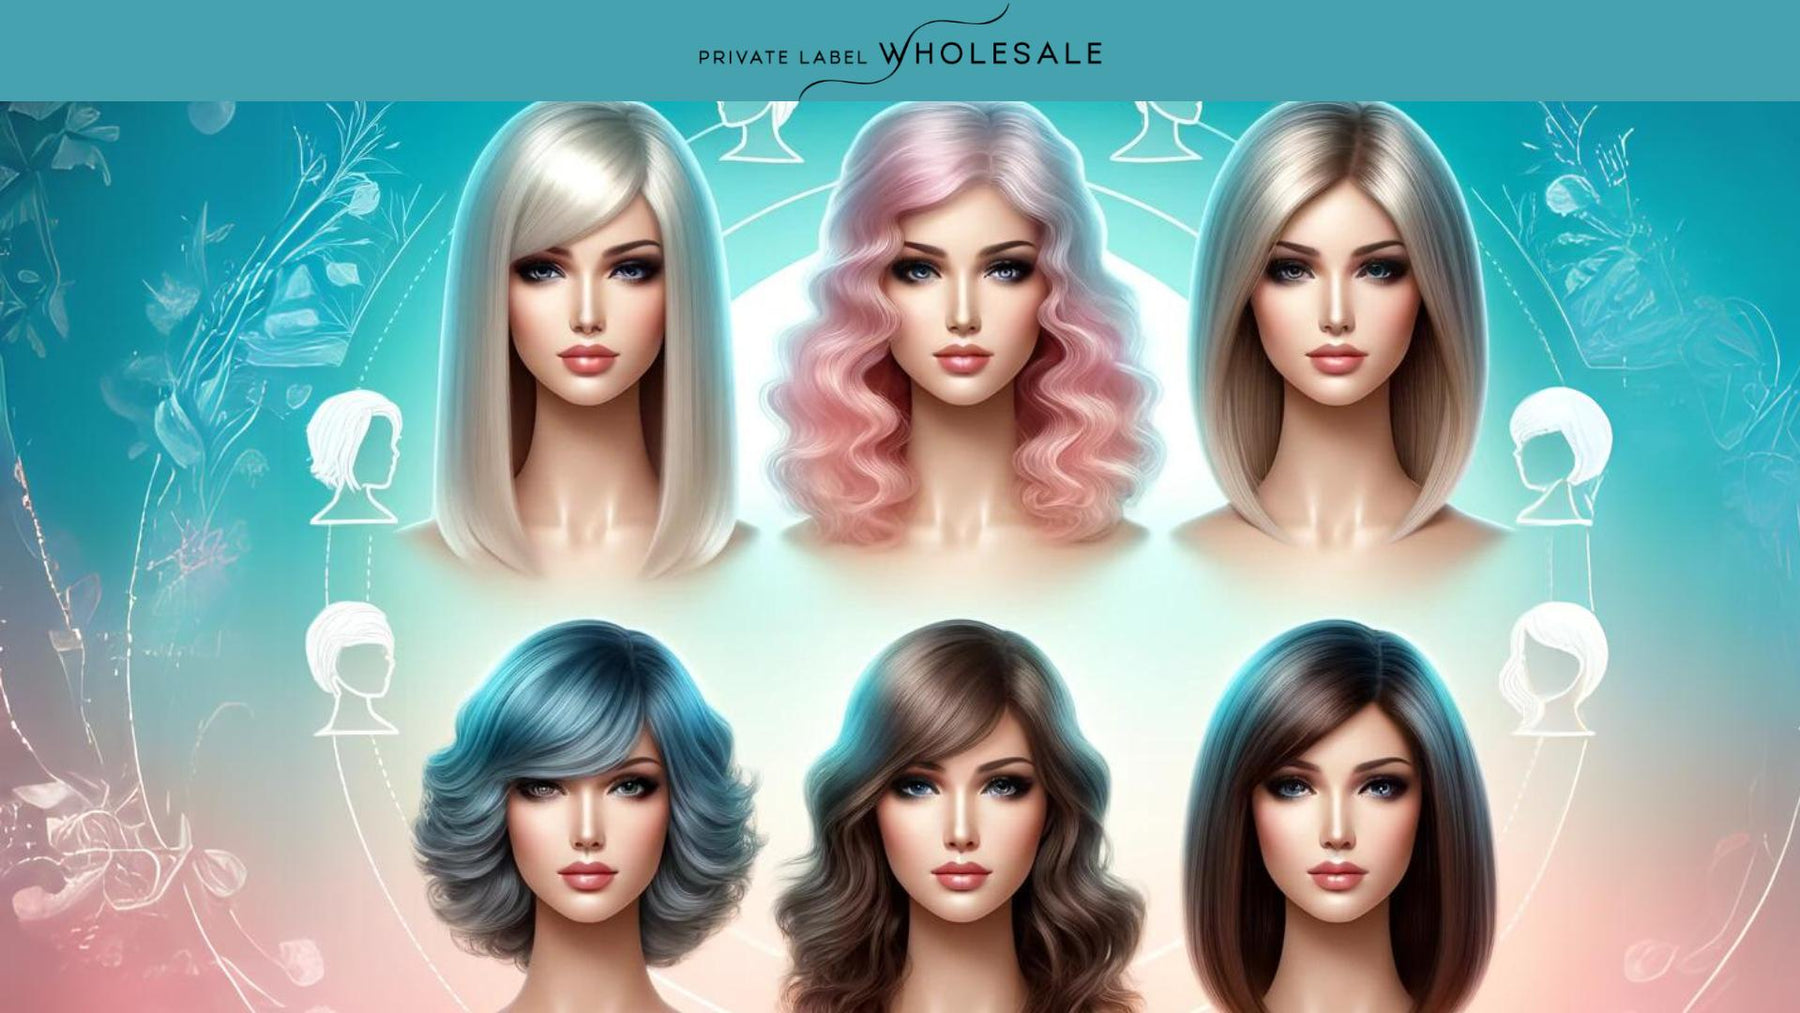 How to Choose the Perfect Wig for Your Face Shape